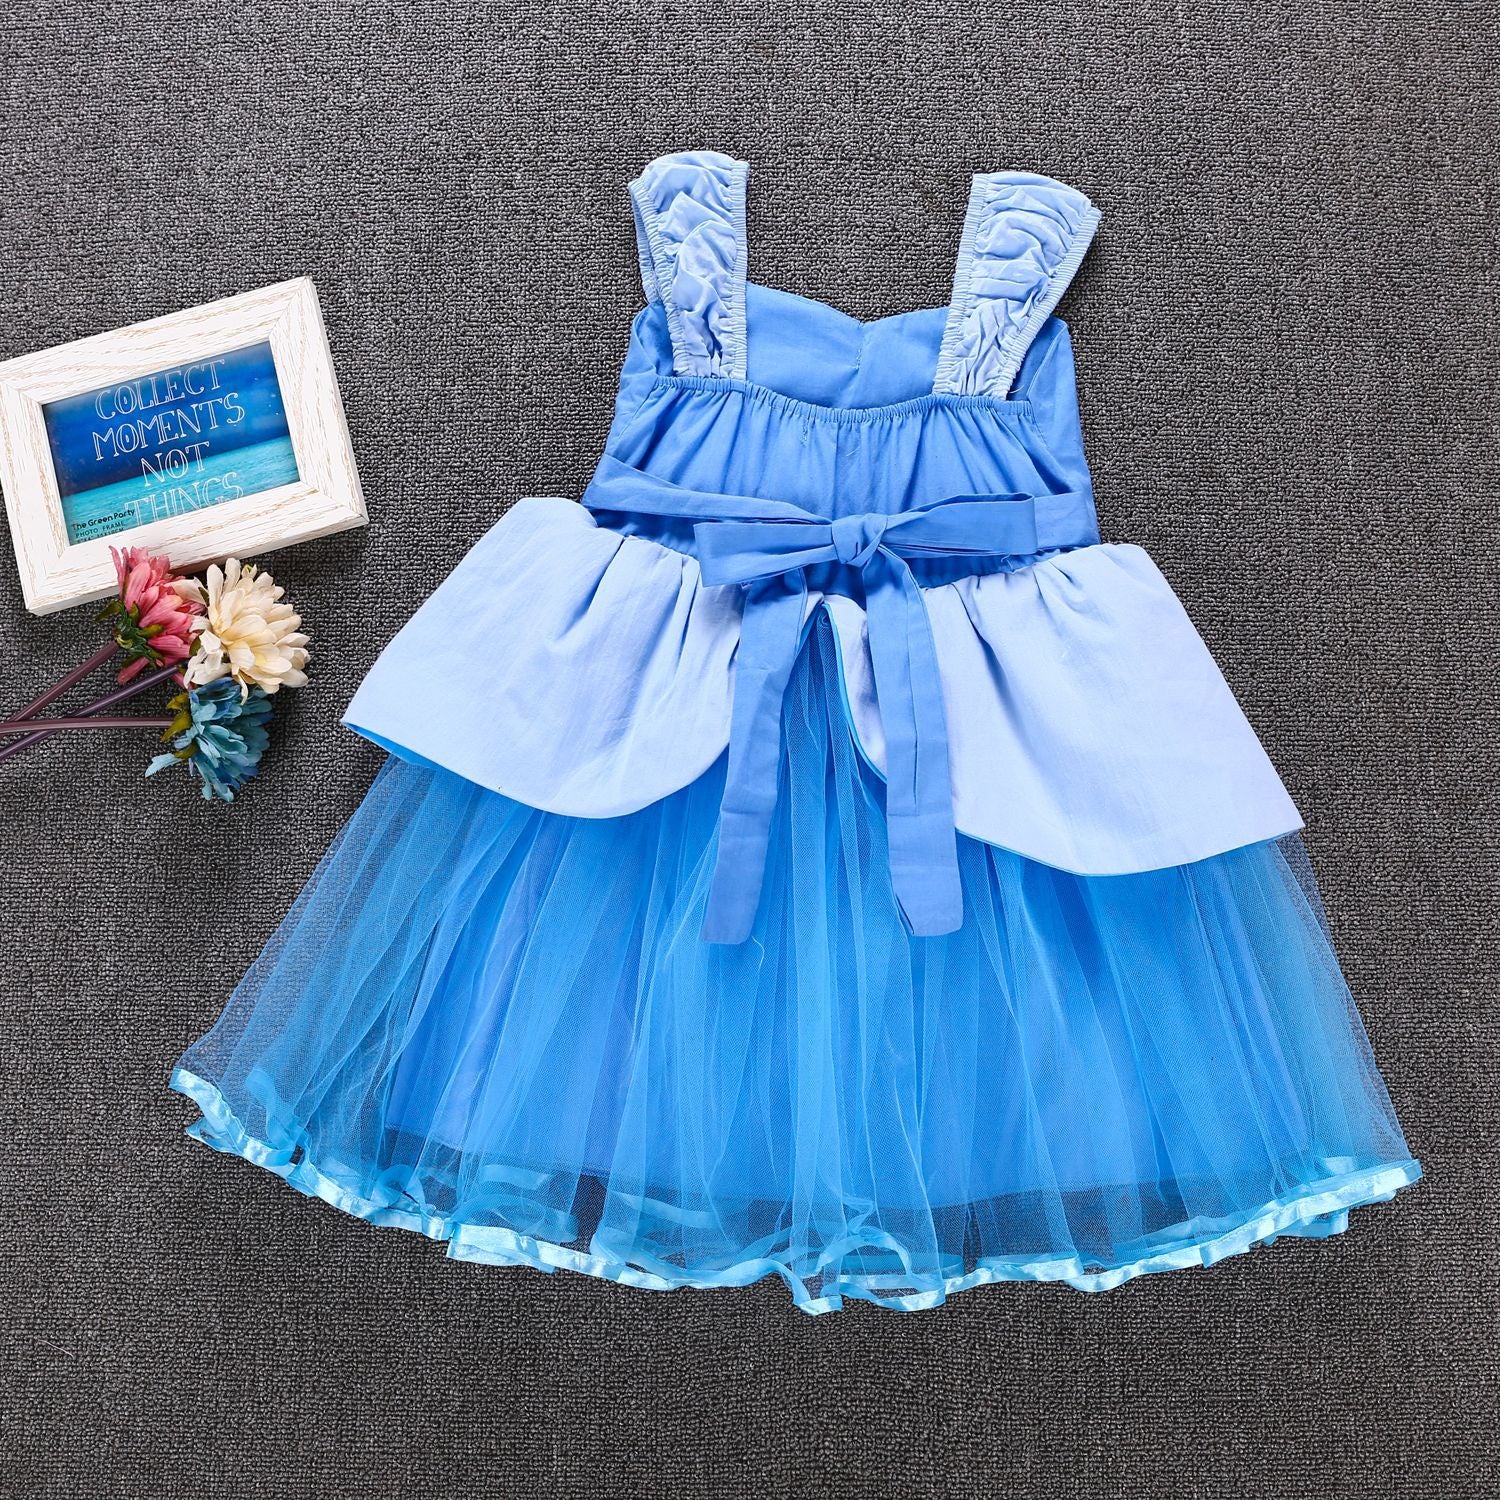 Charming Summer Dresses for Girls from Eternal Gleams.